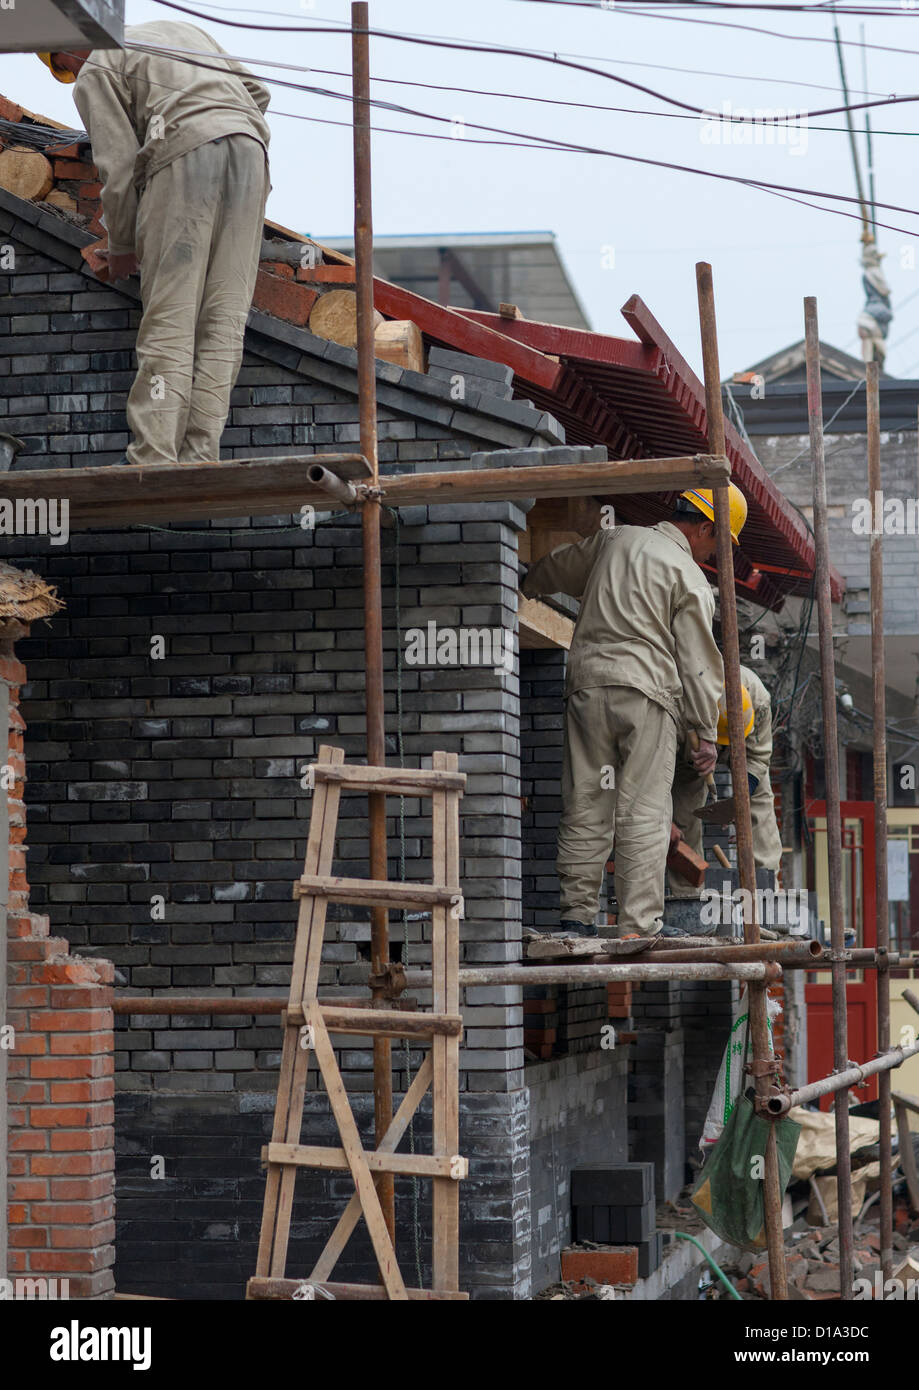 Manual Workers On A Contruction Site In A Hutong, Beijing, China Stock Photo